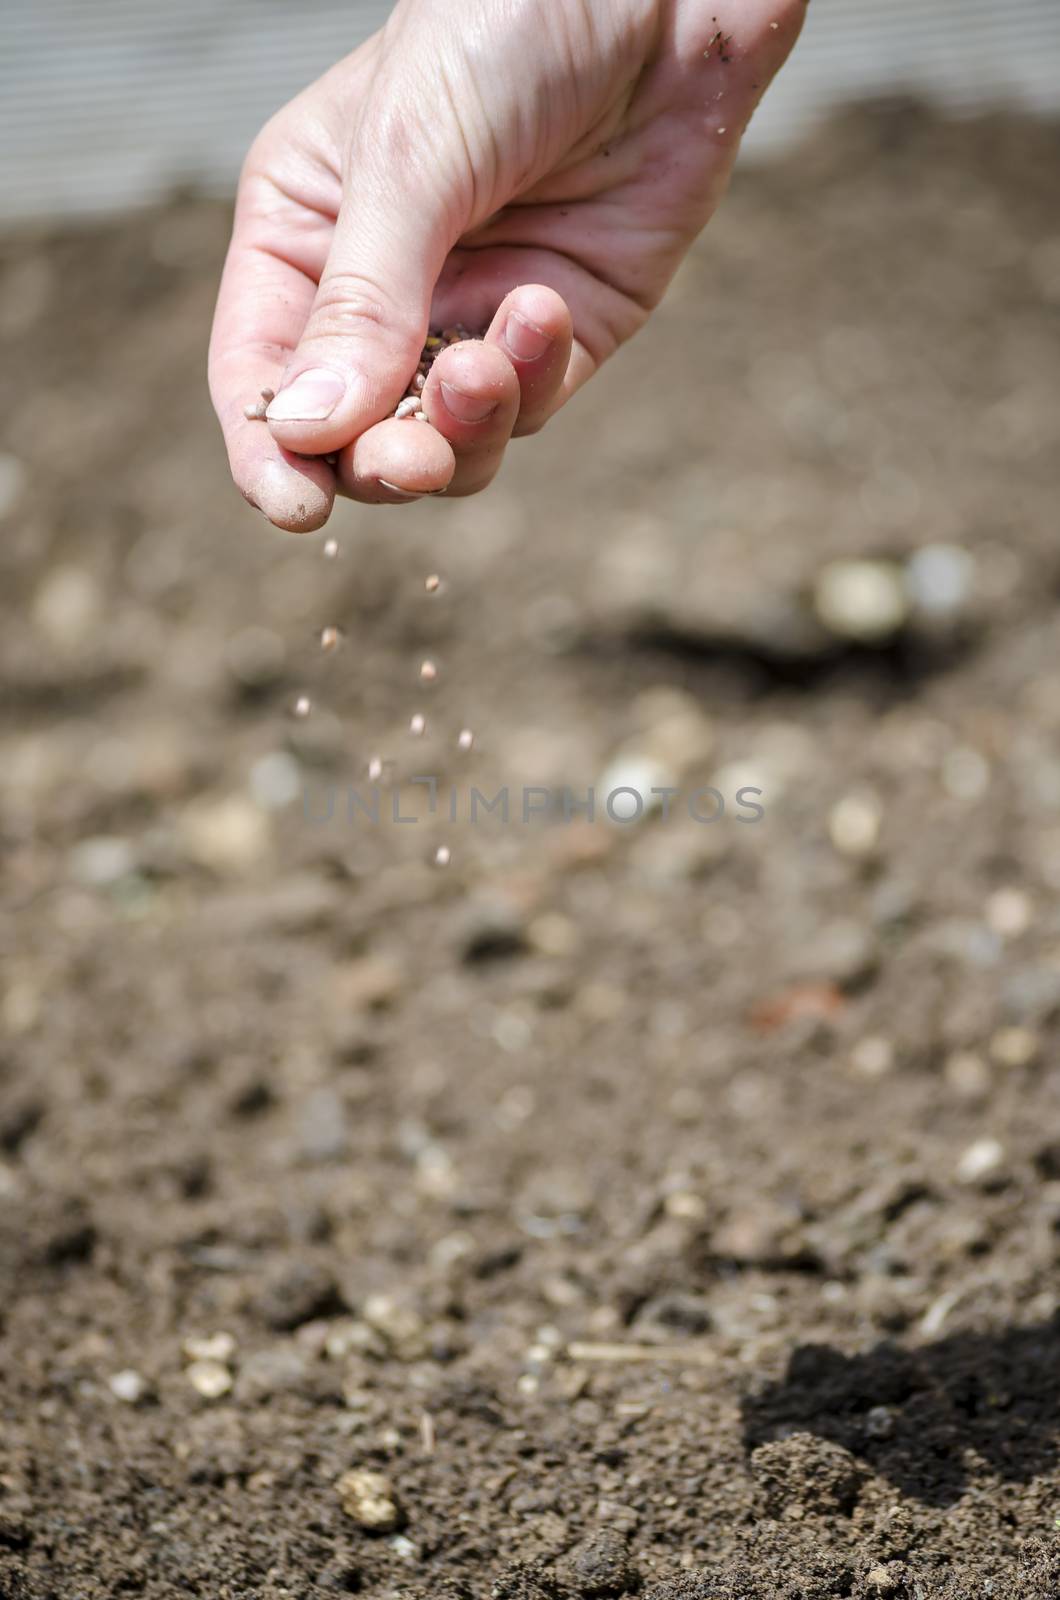 Detail of female hand sowing. Gardening concept.